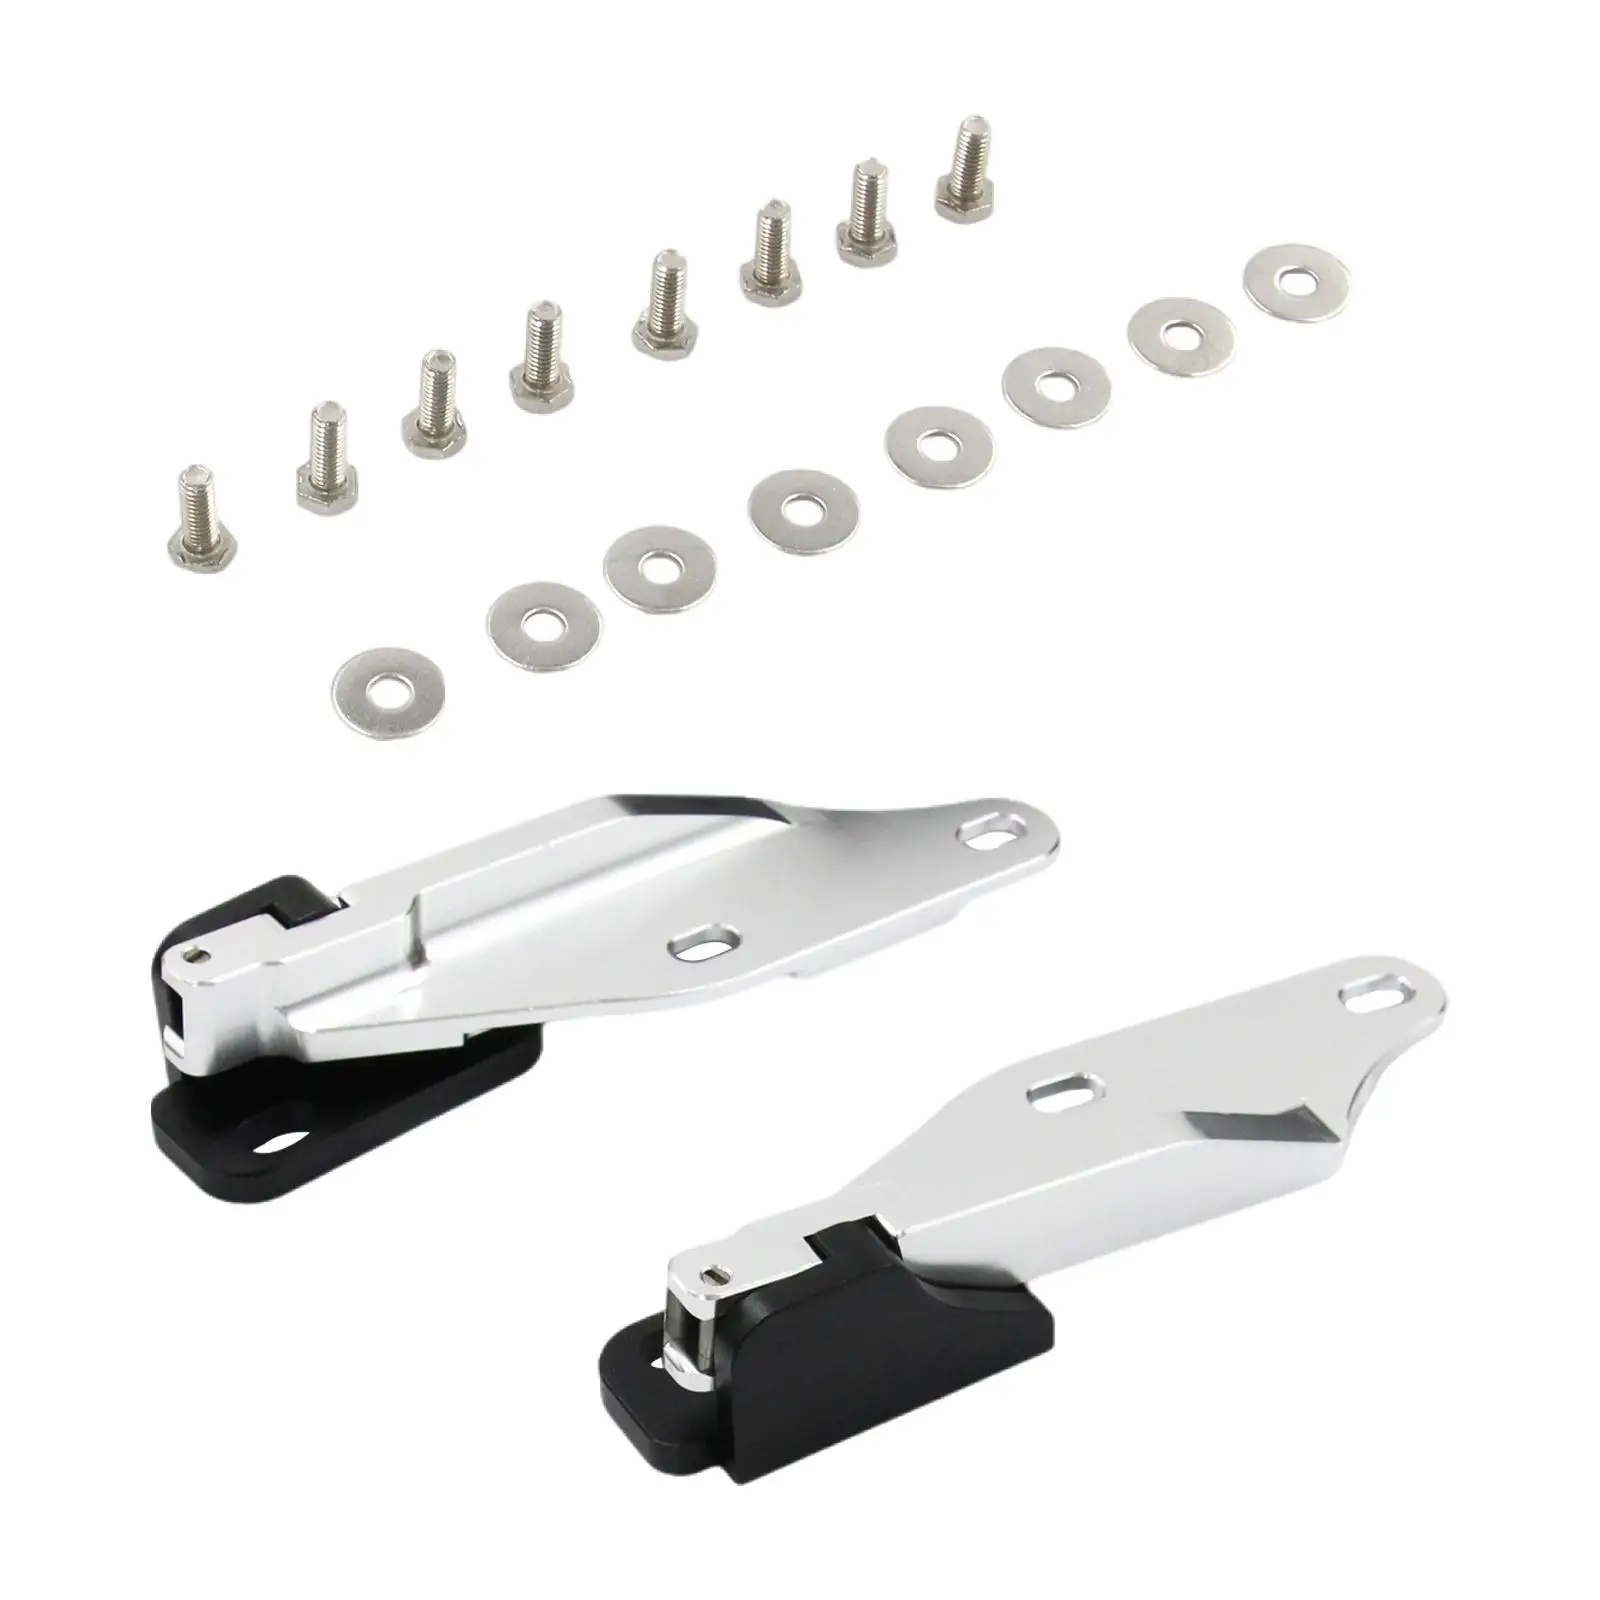 2 Pieces Quick Release Hood Hinge Accessories ,Auto High Strength, Durable